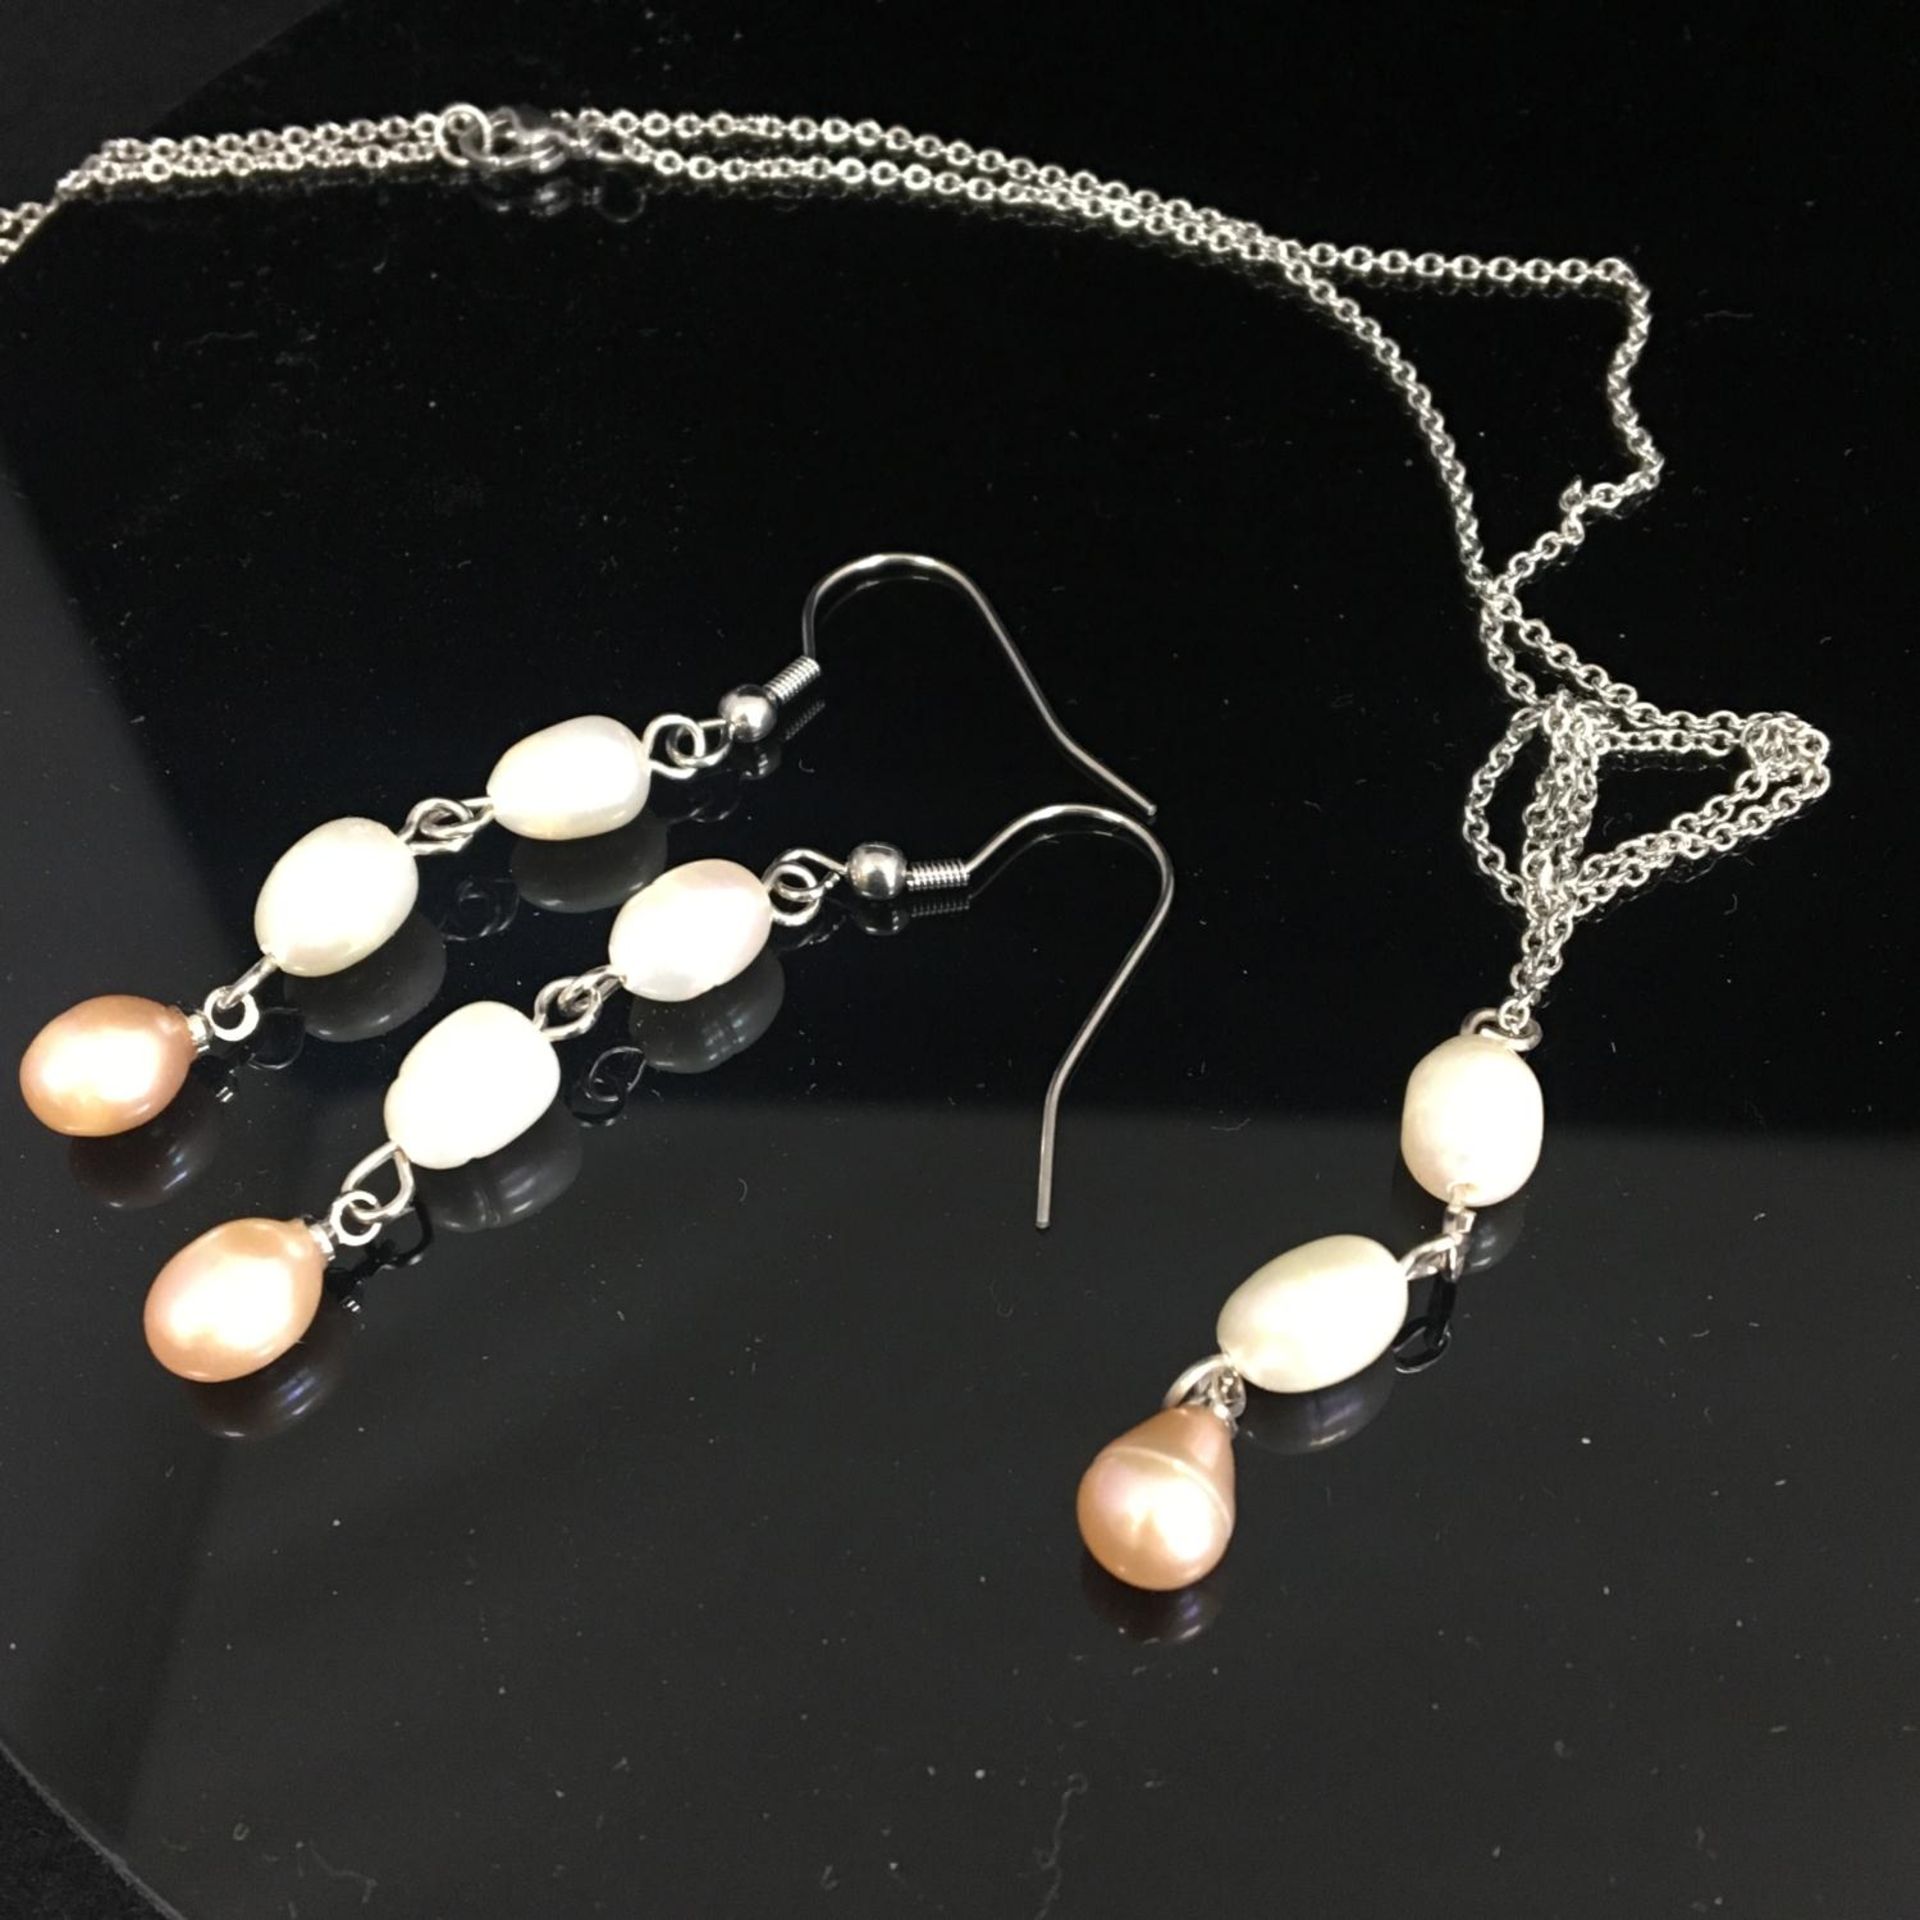 Freshwater pearl necklace with matching earrings. Includes free UK delivery.